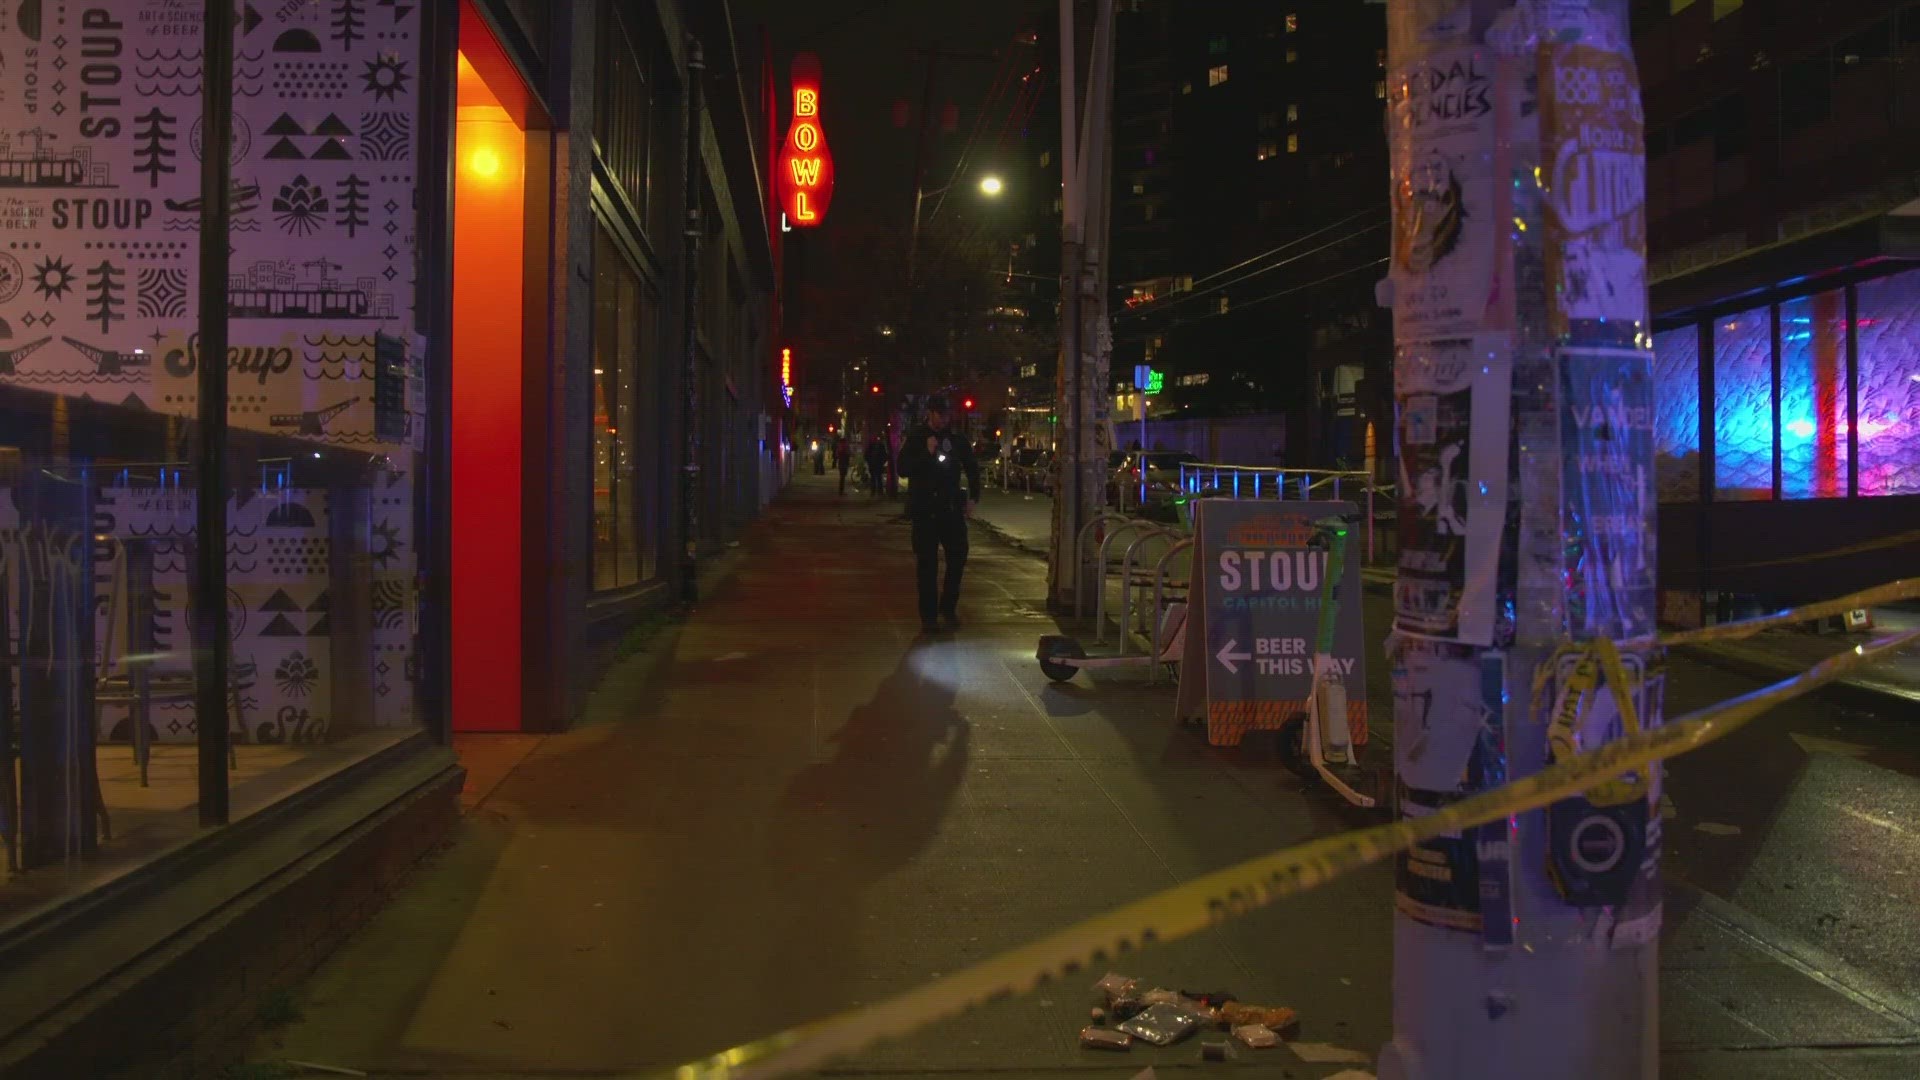 Three people were injured in a shooting Saturday night in Seattle Capitol Hill neighborhood, police said.